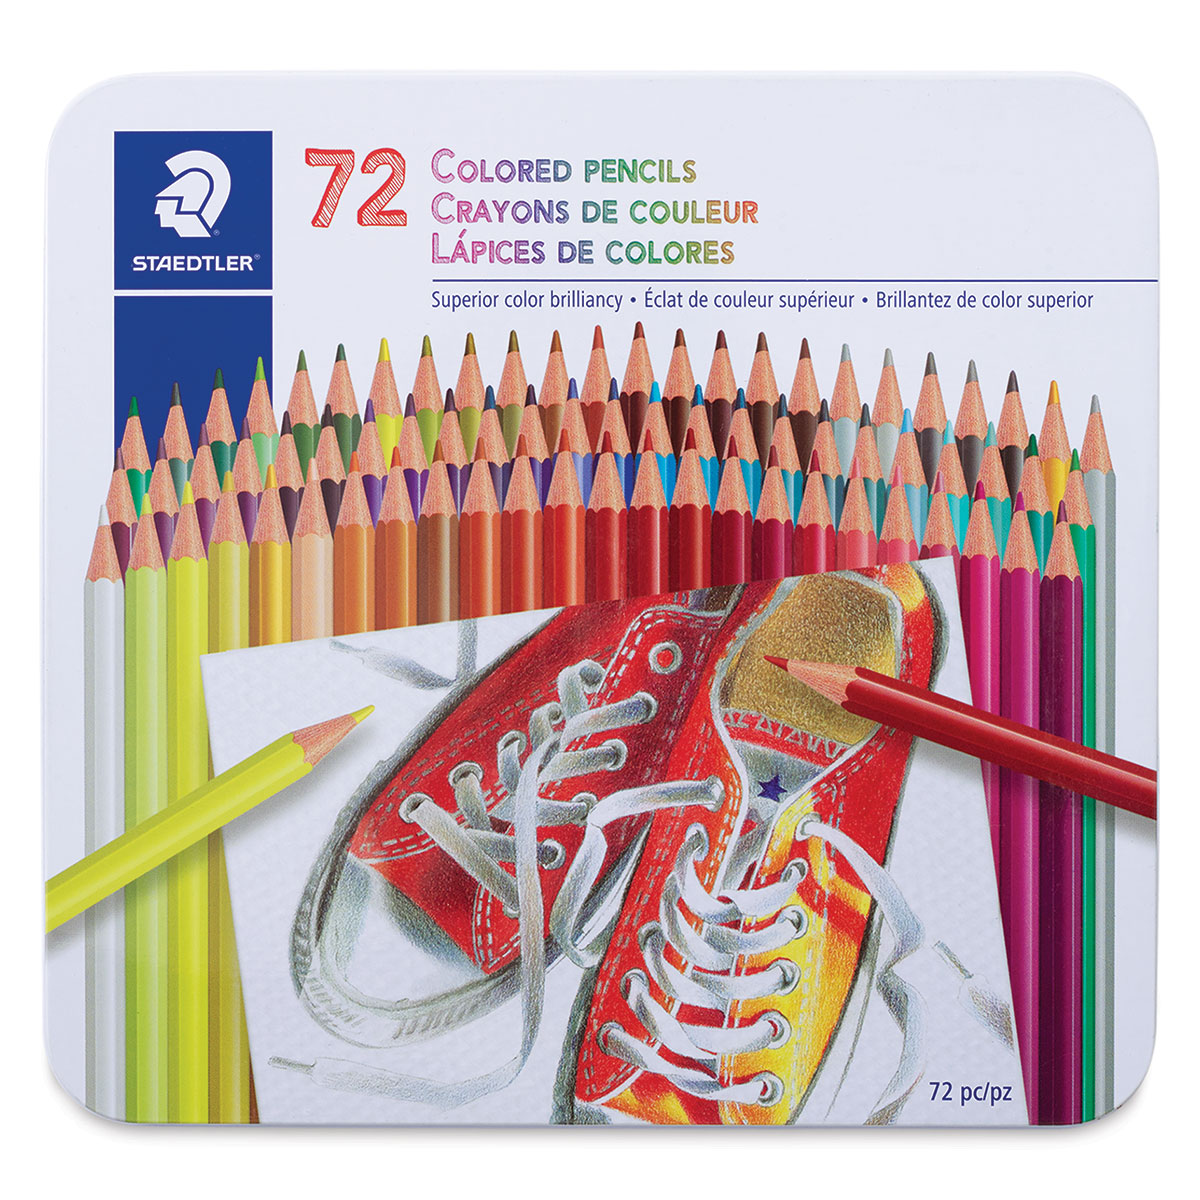 Pencils - Comes in Red Yellow Green colors Pack of 72 